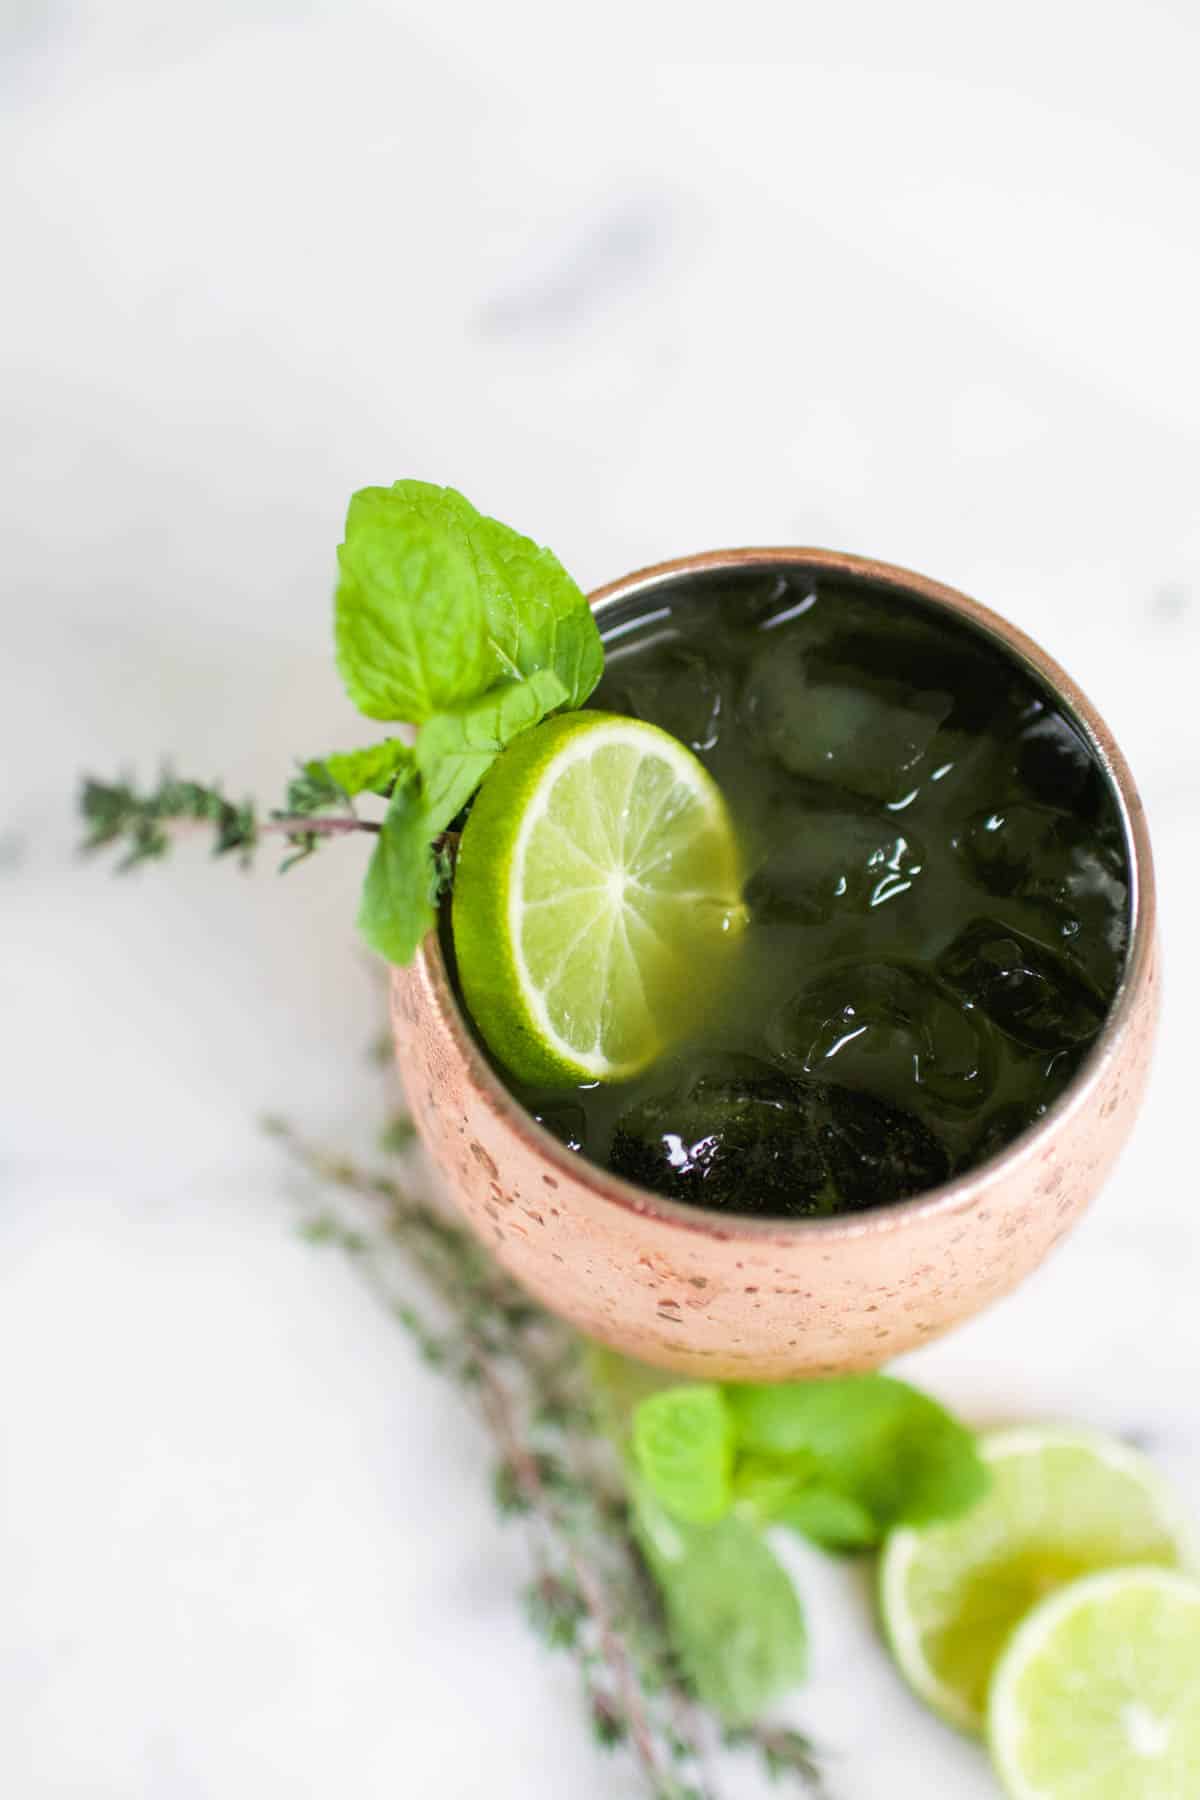 Top down view of a copper Moscow Mule mug holding a green cocktail and garnished with a lime slice and fresh herbs for St. Patrick's Day.